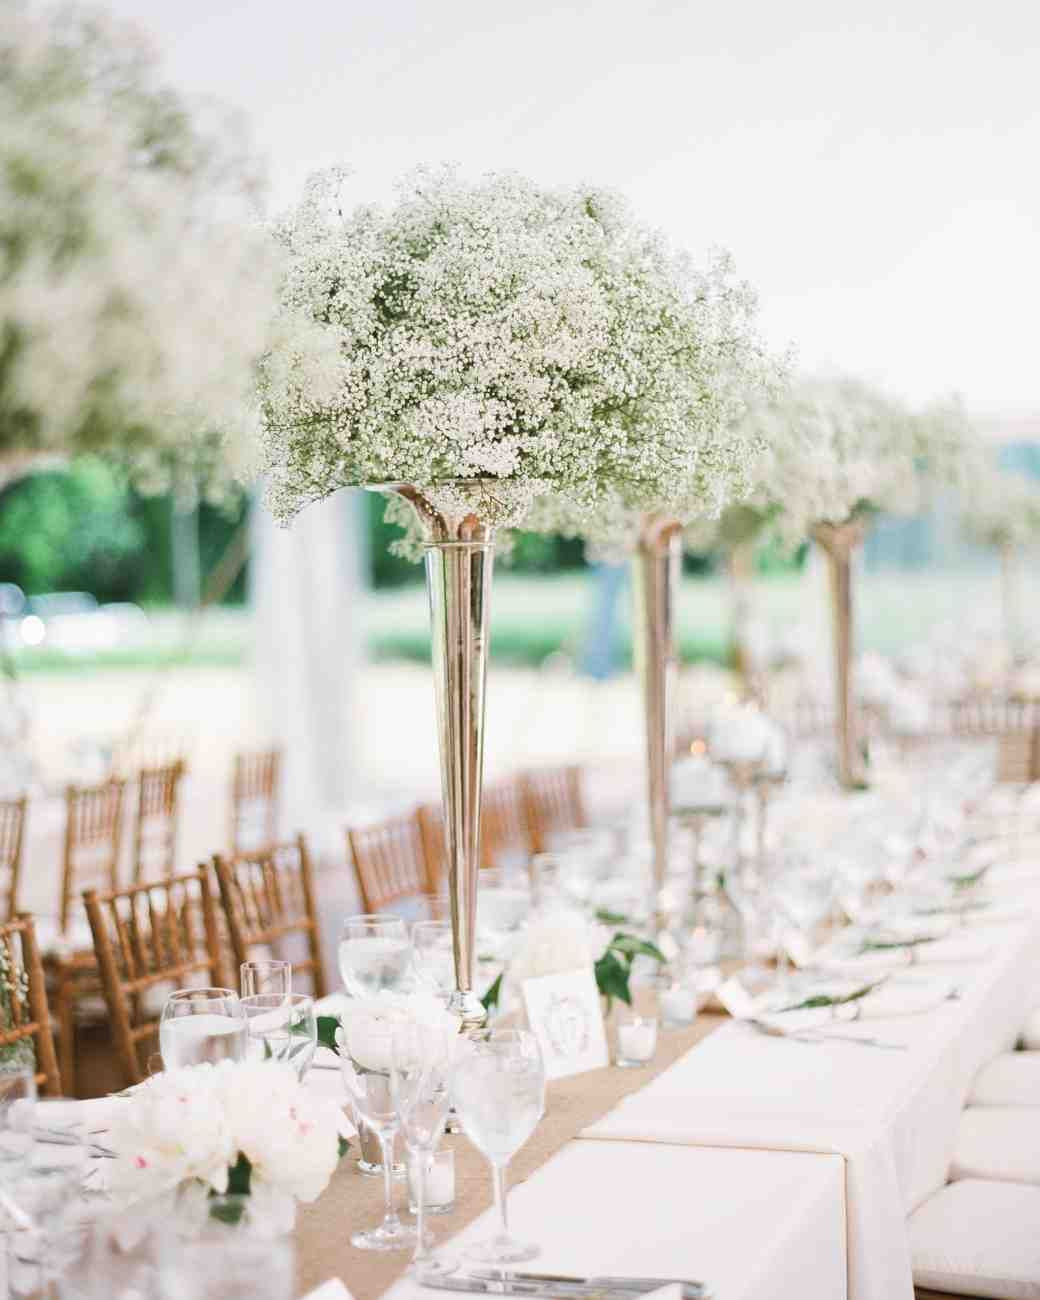 Cheap Wedding Table Decorations
 Affordable Wedding Centerpieces That Still Look Elevated